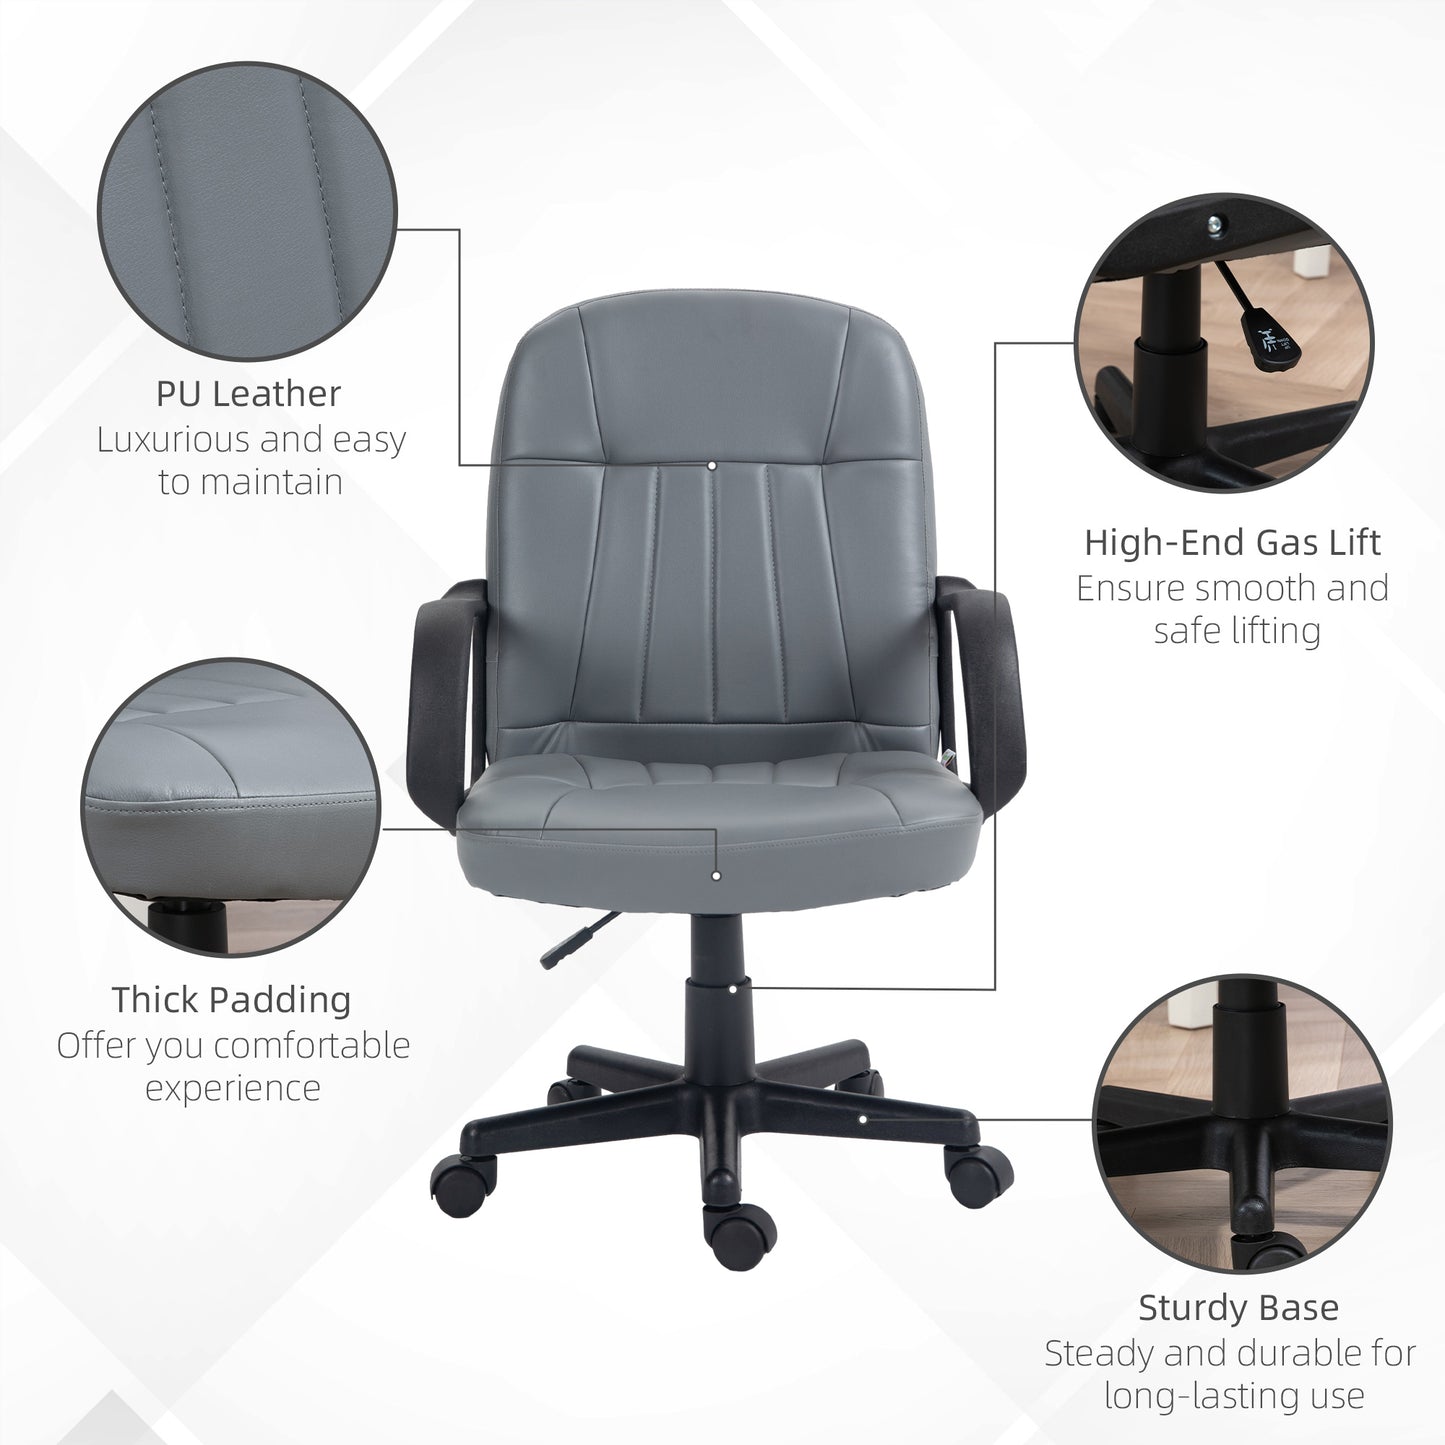 Vinsetto Swivel Executive Office Chair PU Leather Computer Desk Chair Office Furniture Gaming Seater - Grey